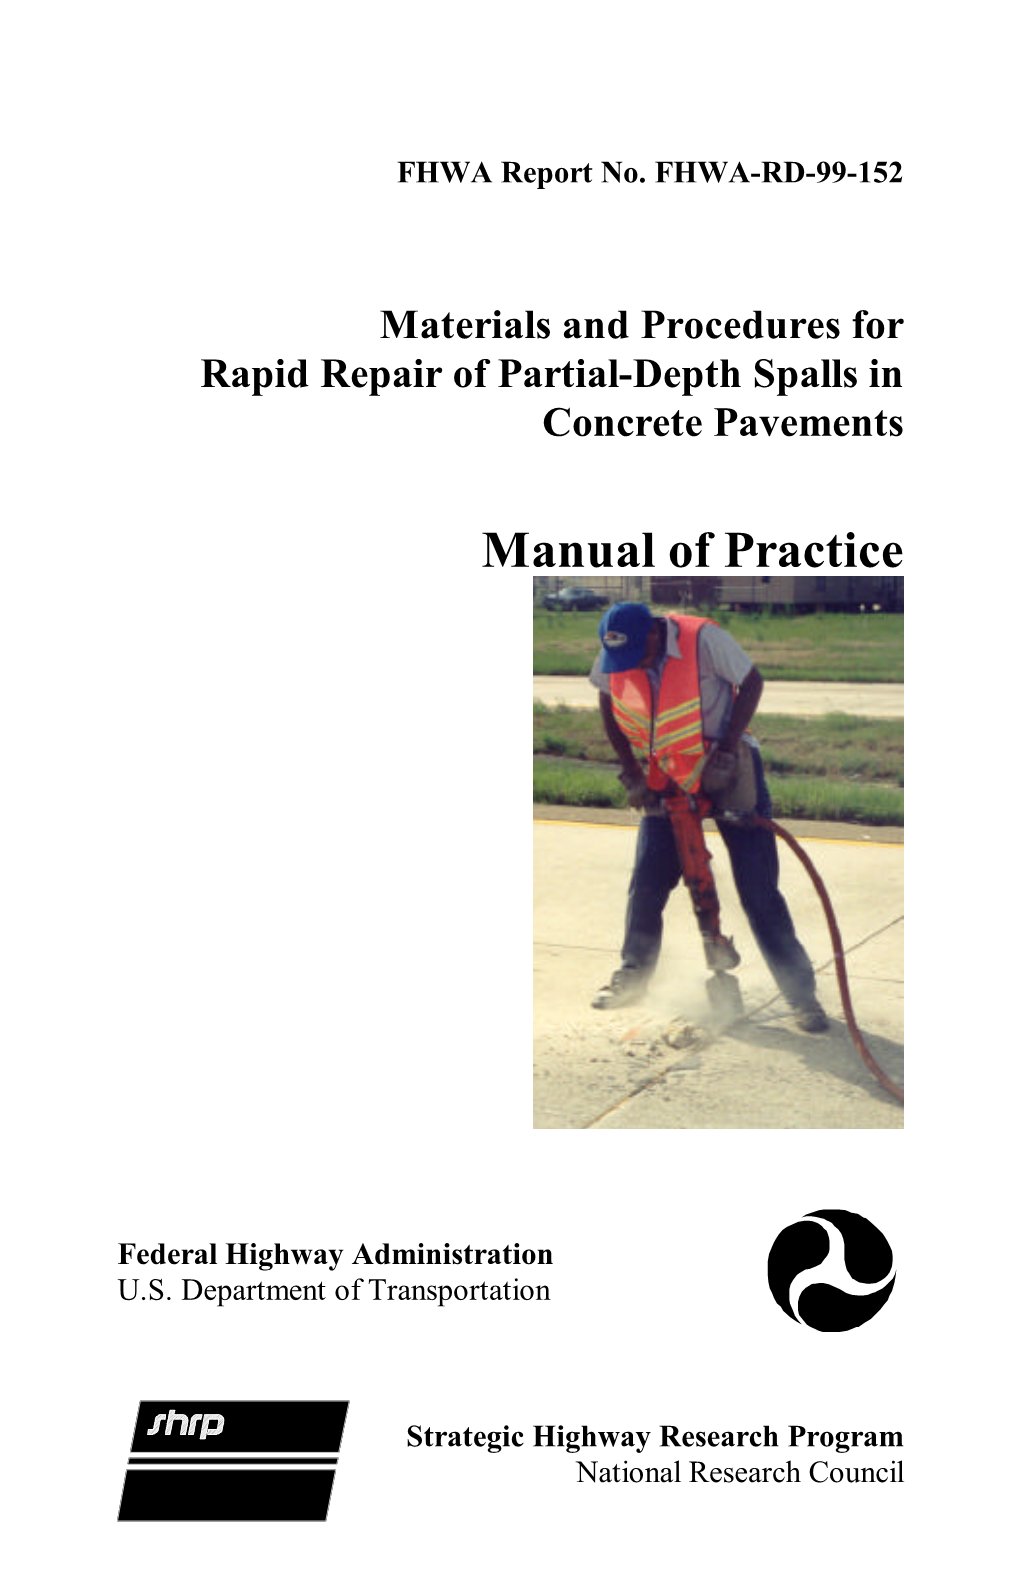 Manual of Practice